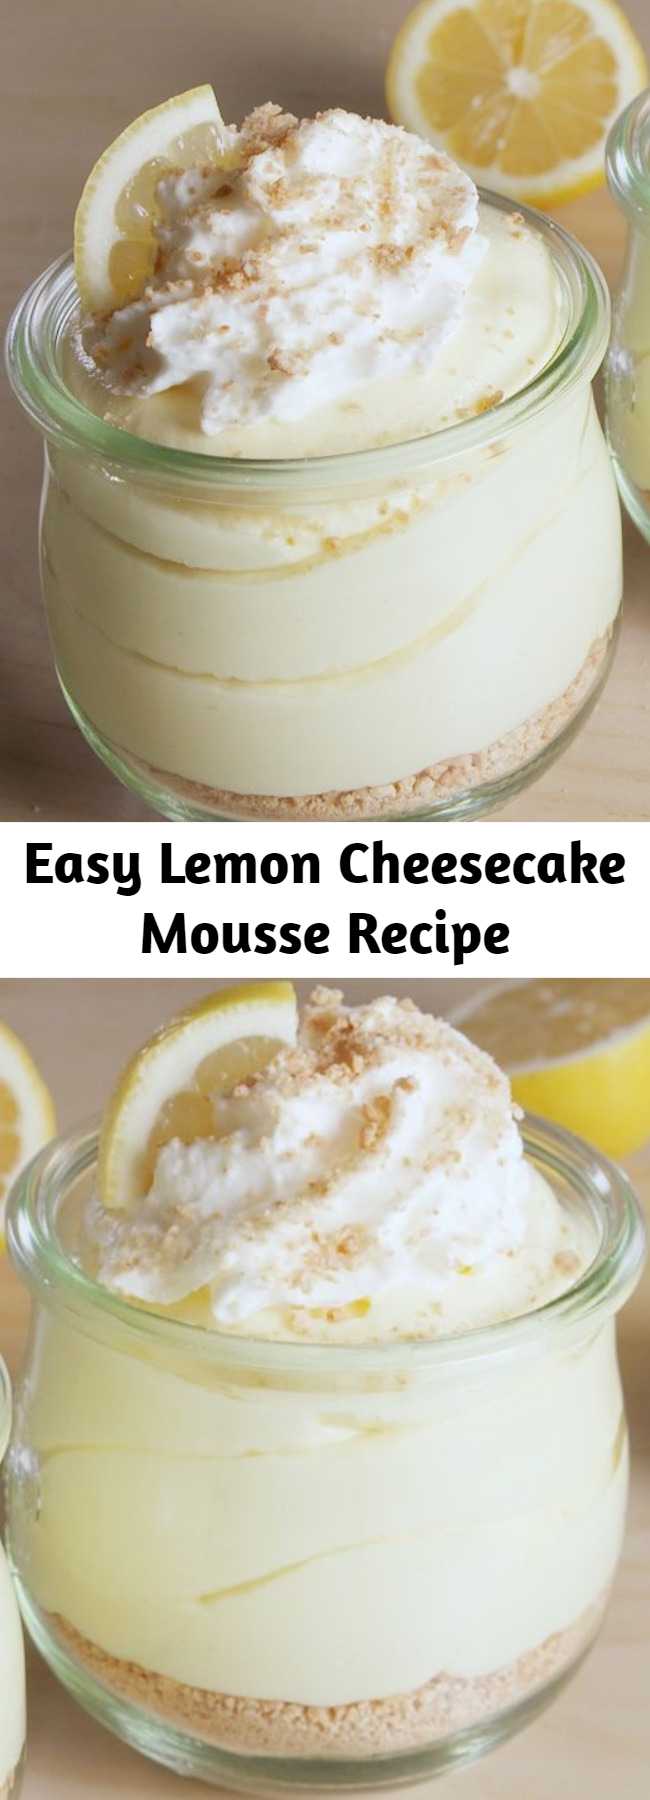 Easy Lemon Cheesecake Mousse Recipe - These light little cheesecake mousses ake the perfect spring or summer dessert - and we're obsessed! They're great for making ahead of the party or dinner party, then bringing out of the fridge last minute so you look like the organised chef you are. The biscuit base adds a lovely texture to these light, fluffy mousses. Plus, they're SO easy to make! #sweet #tart #lemon #cheesecake #mousse #dessert #easyrecipe #recipe #fruity